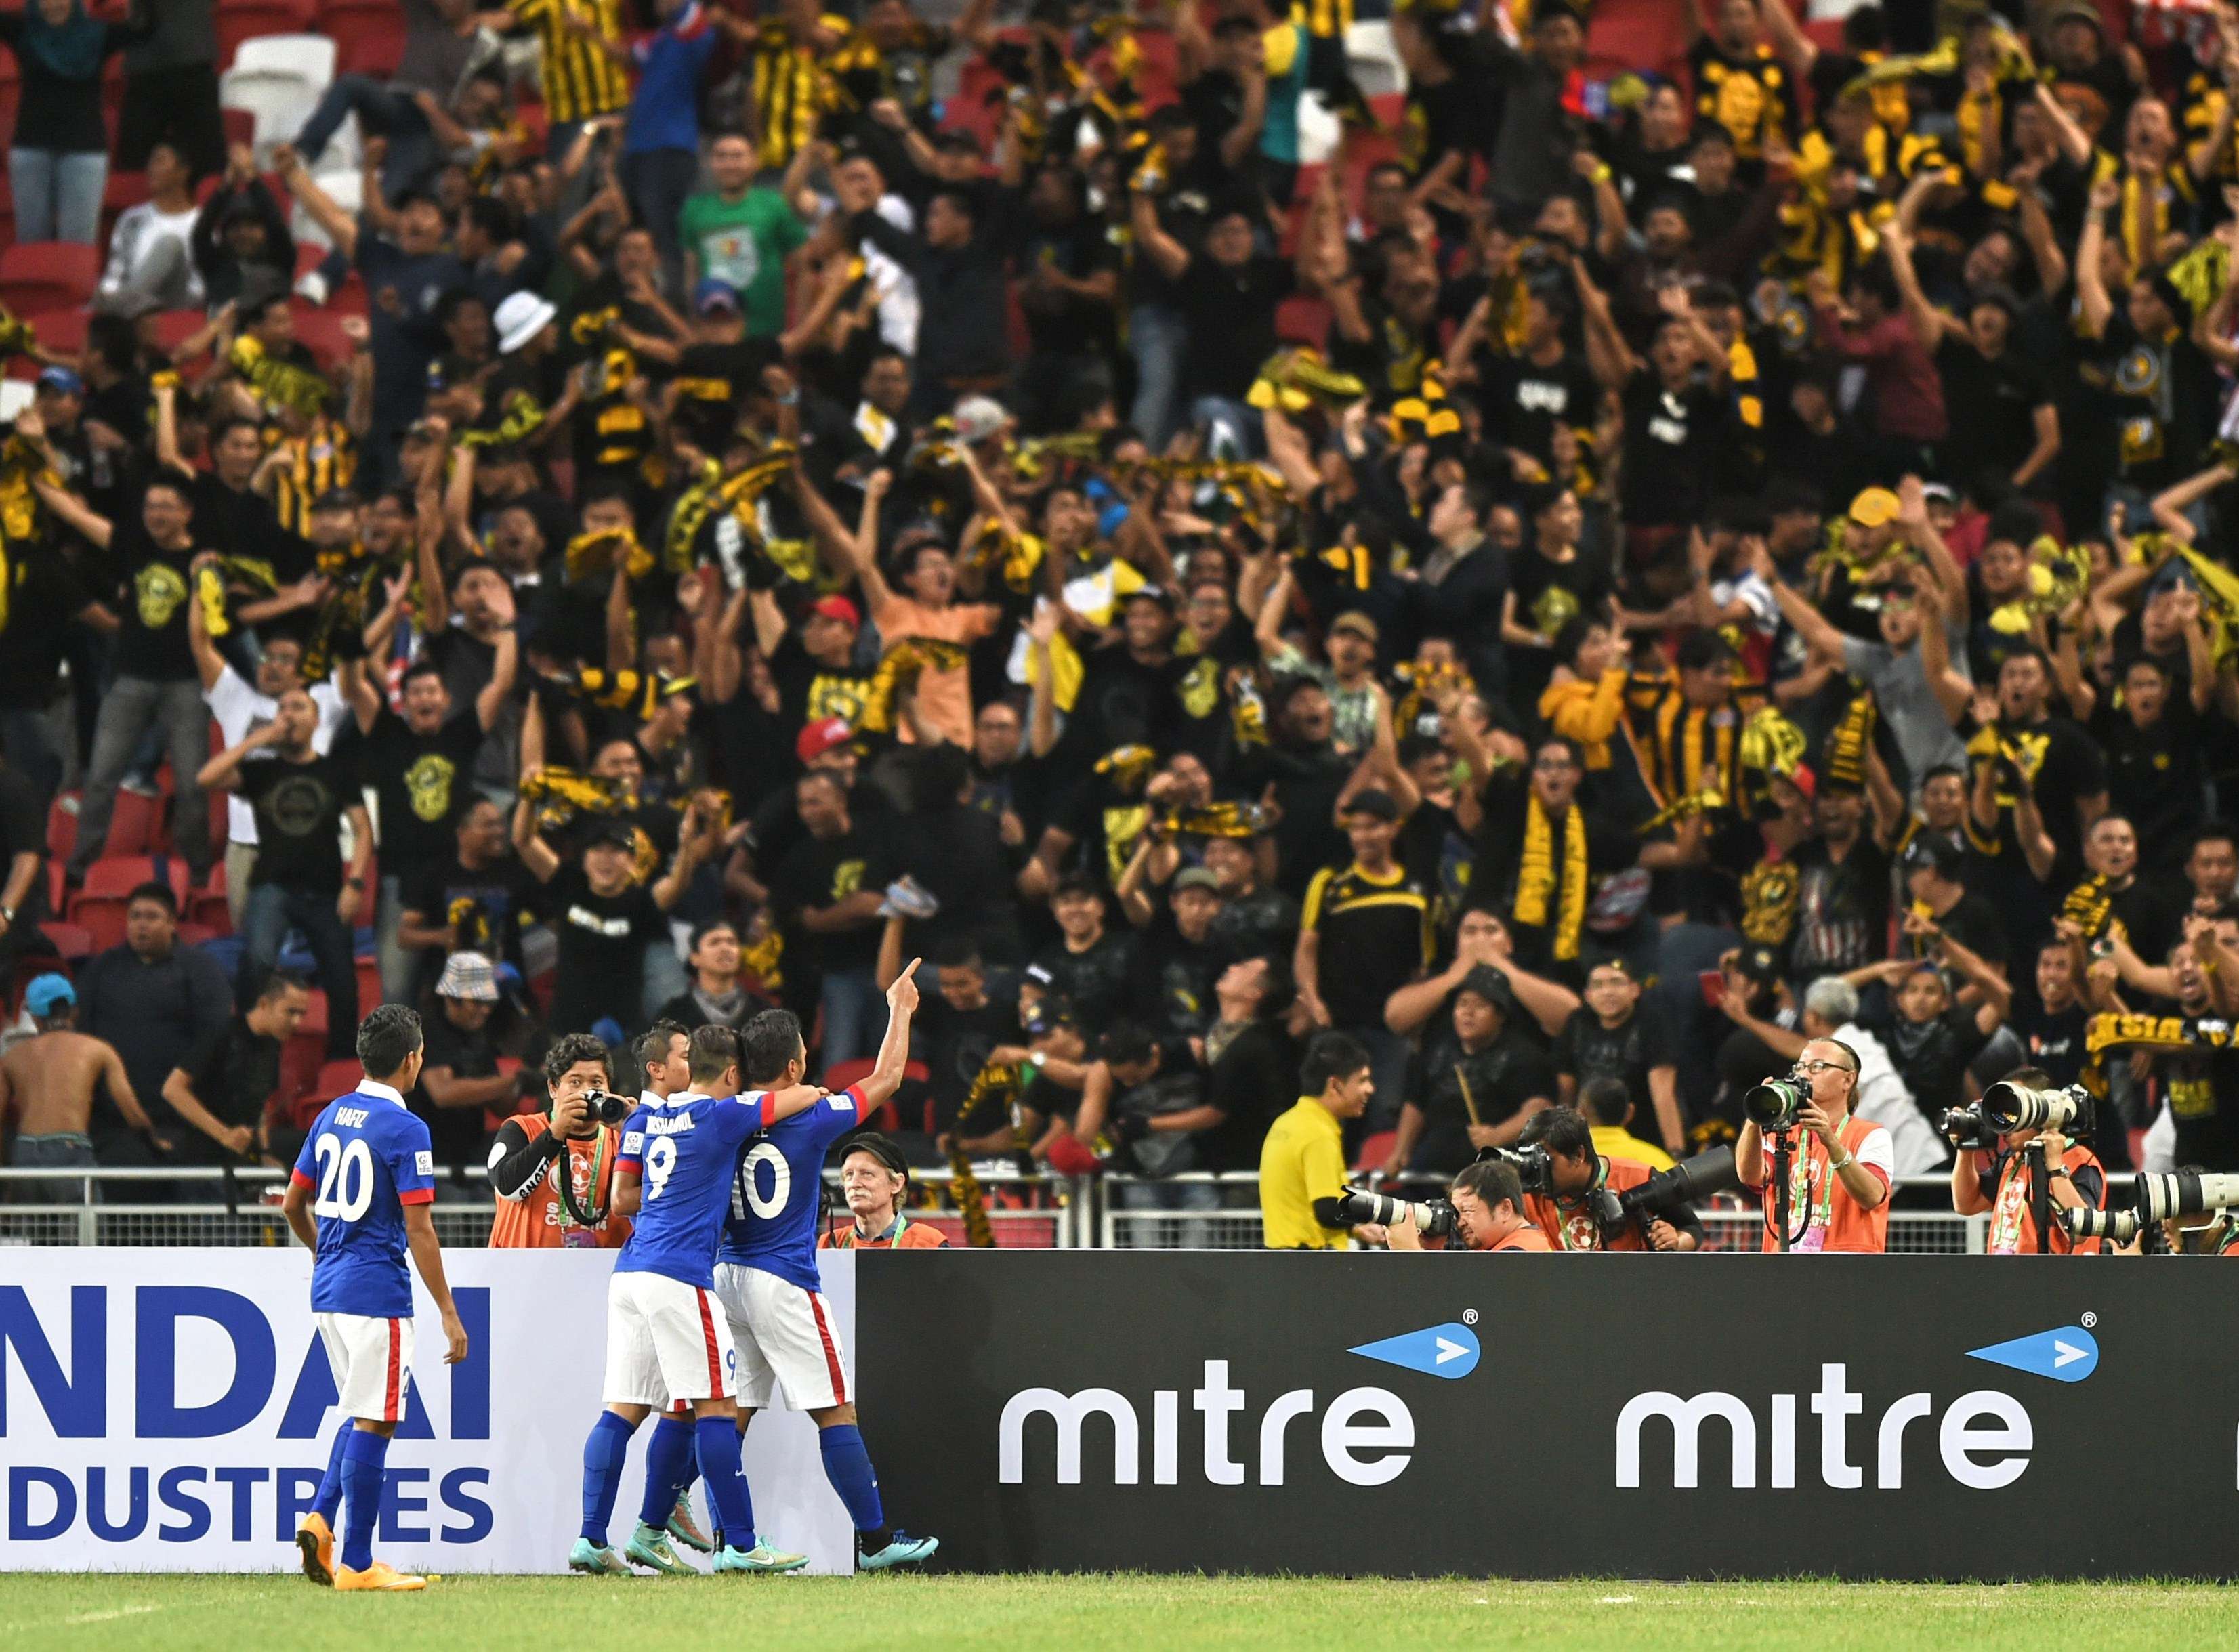 Malaysian players celebrating a goal against Singapore in the 2014 AFF Suzuki Cup